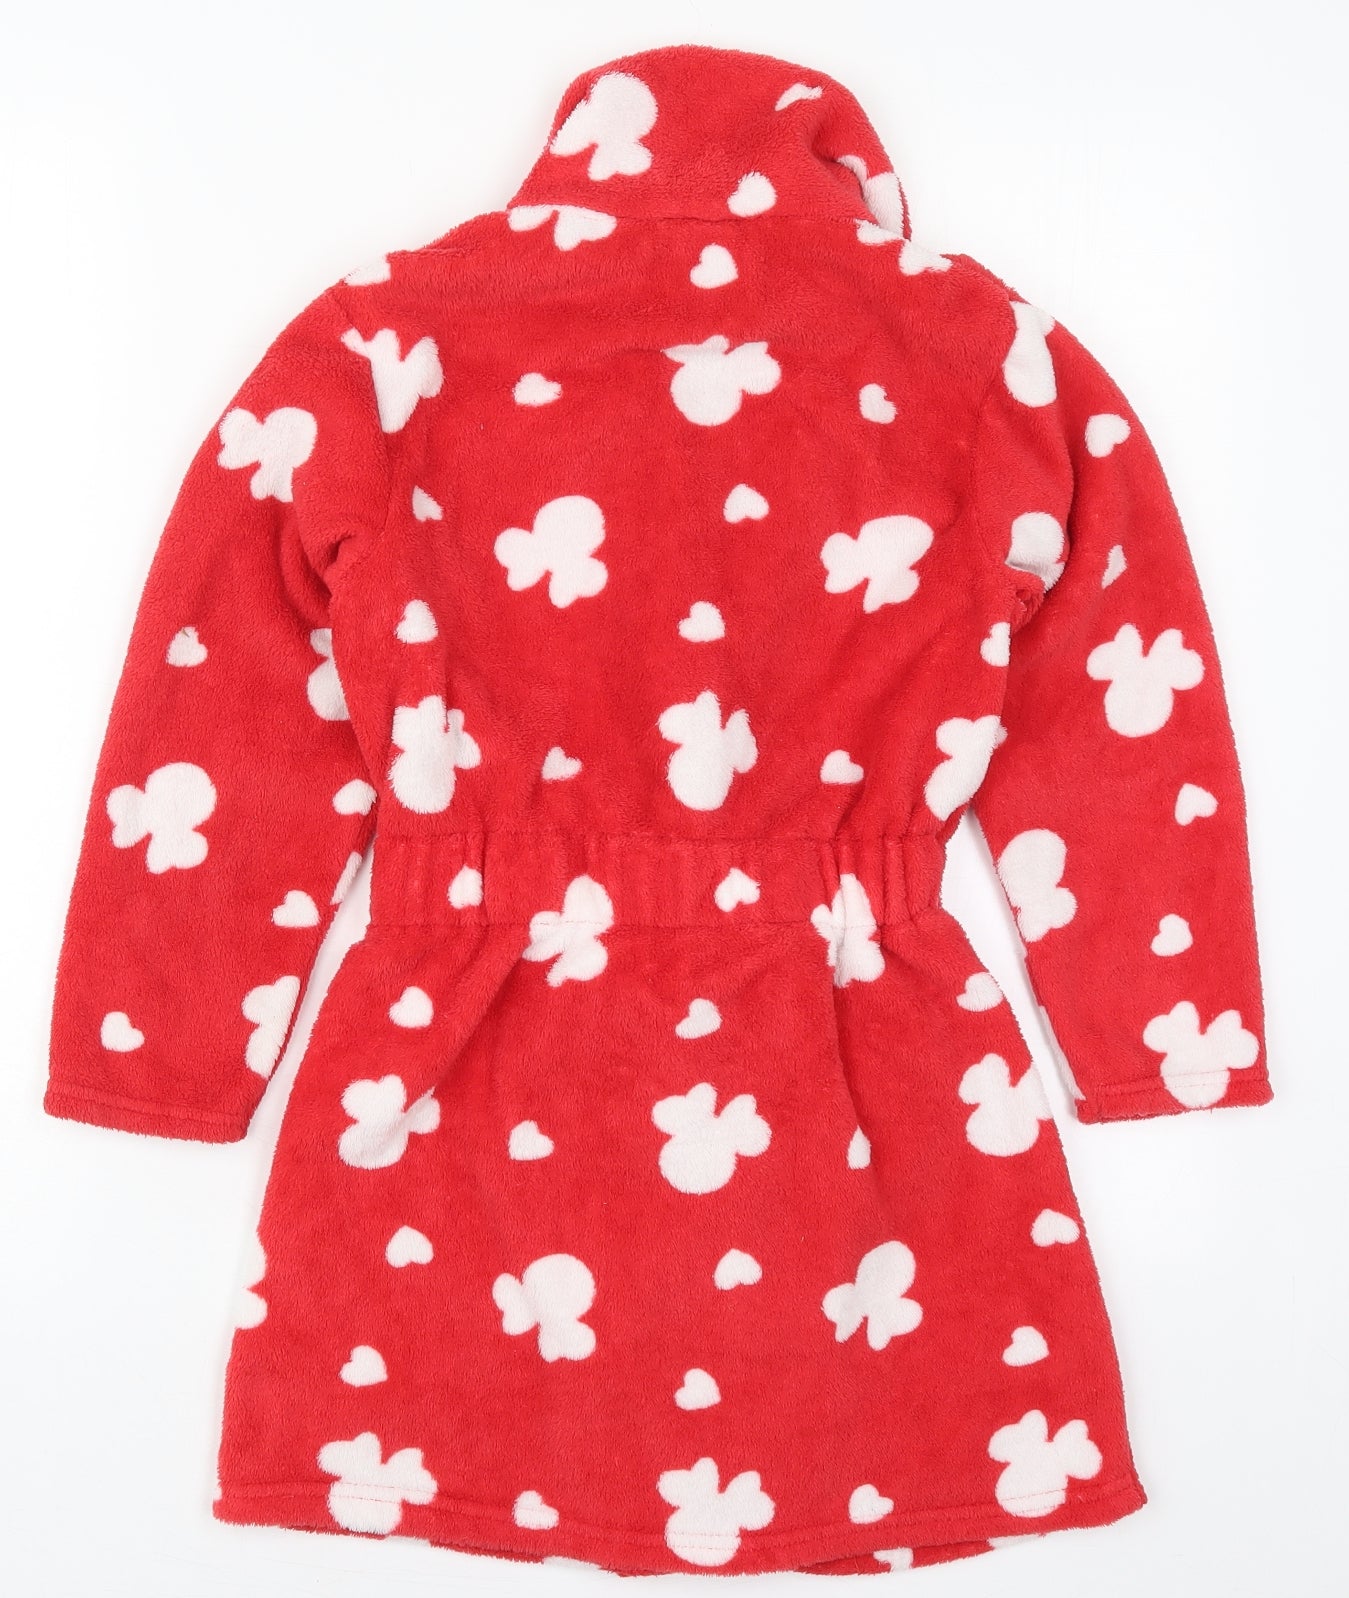 Disney Girls Red Solid Polyester Kimono Robe Size 8-9 Years  Button - Minnie Mouse